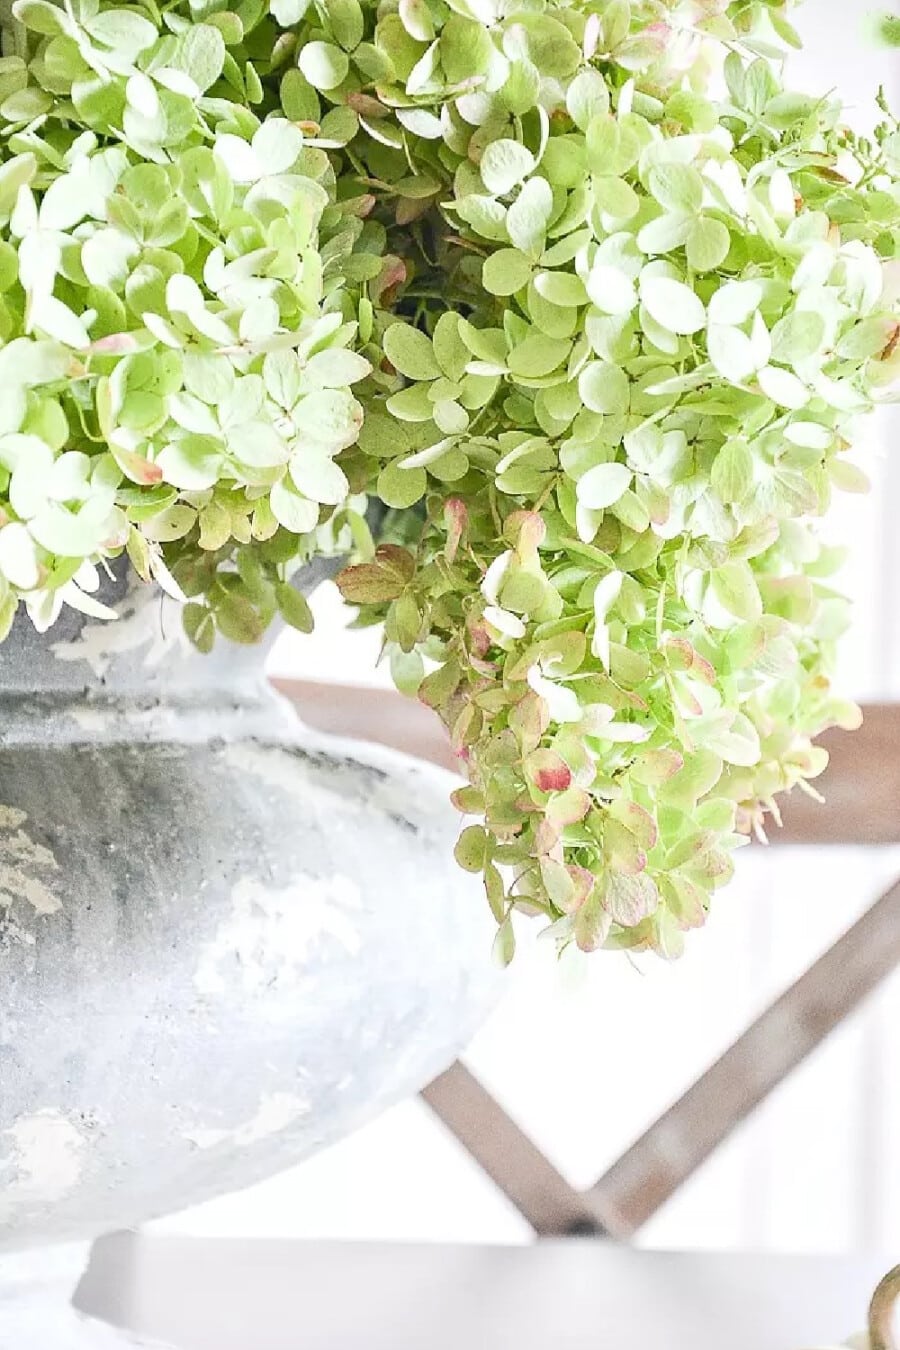 Drying Hydrangeas The Easy Way, Fall Ideas, A Symmetry Lesson, and A Home Tour